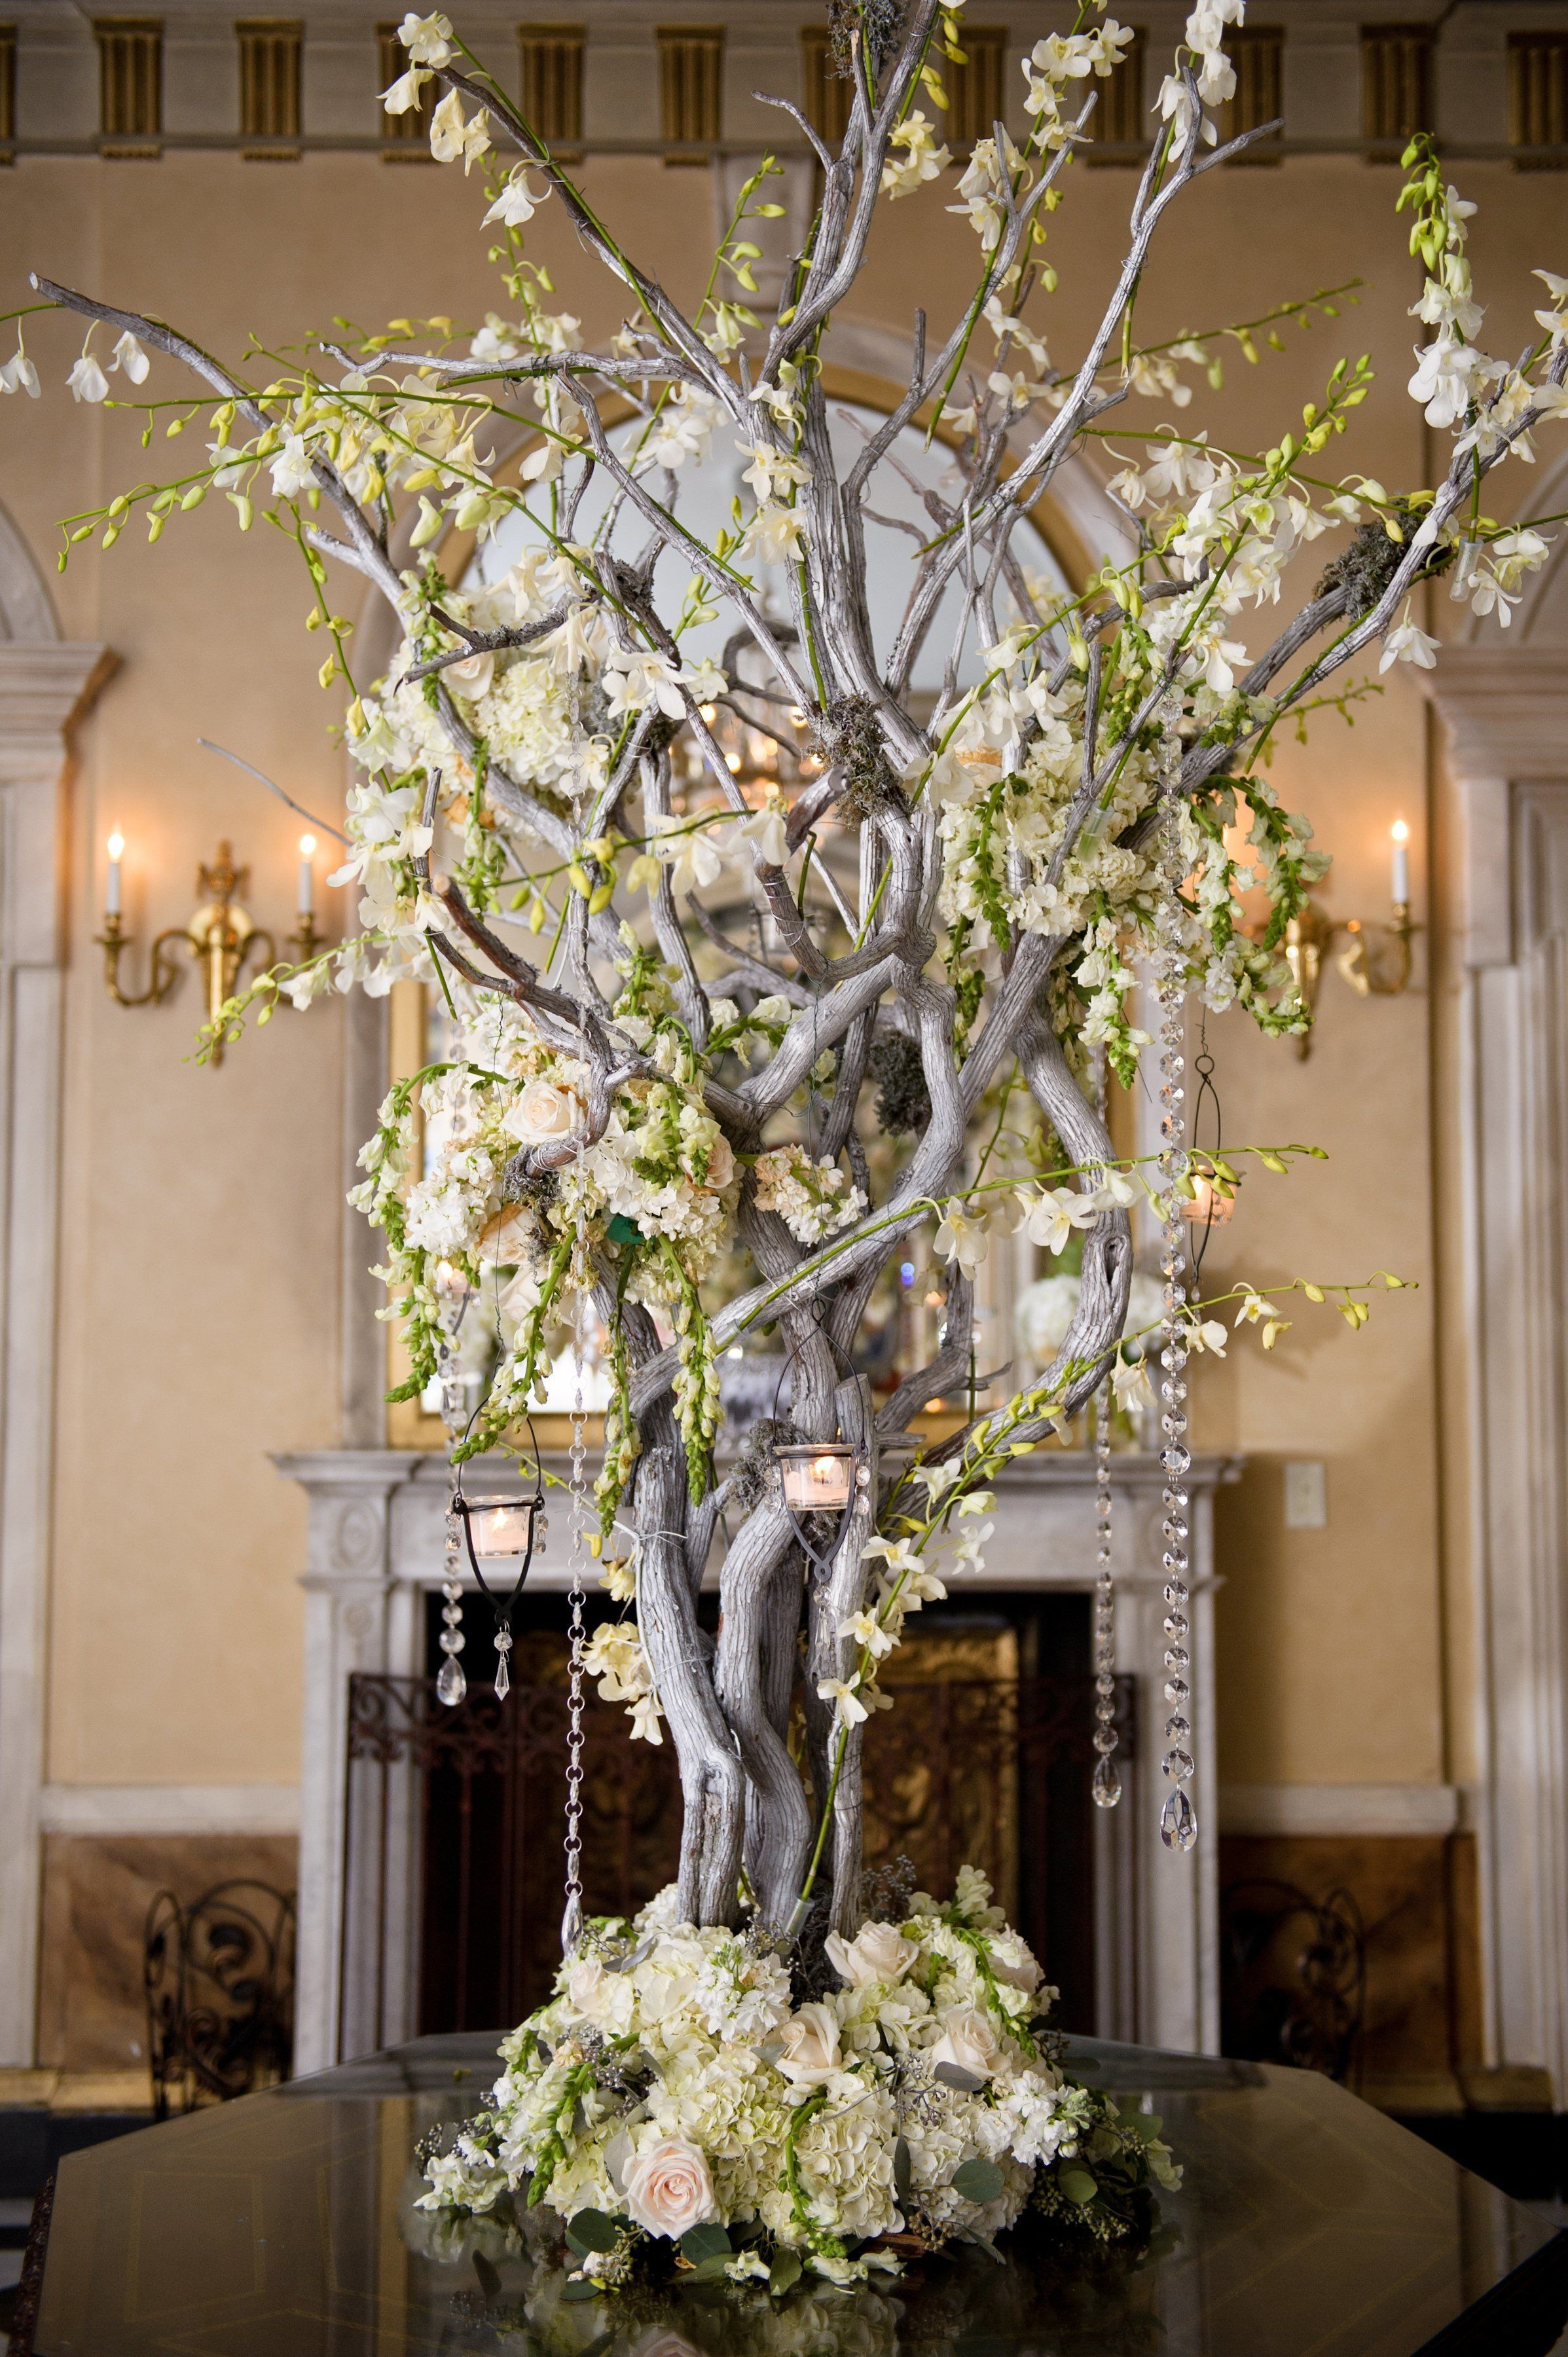 champagne metal floor vase of decorative branches for weddings awesome tall vase centerpiece ideas with decorative branches for weddings best of a tall arrangement of manzanita branches dripping with white blooms